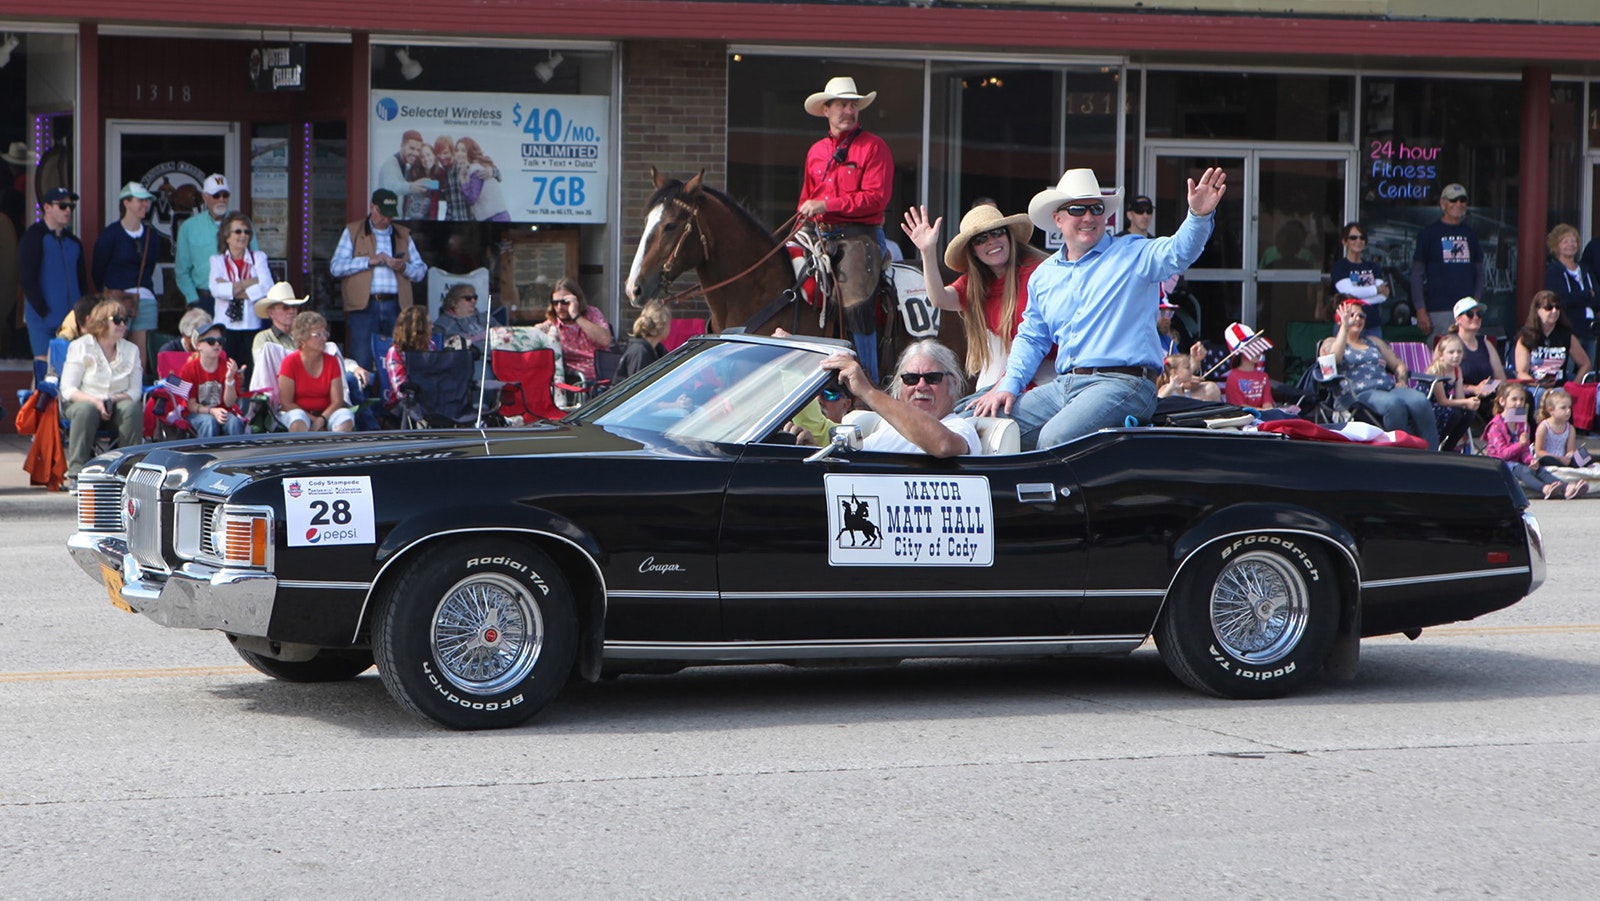 Cody Mayor Matt Hall, seen in this file photo during a parade, has temporarily blocked a building permit for a new Church of Jesus Christ of Latter-day Saints temple in the city.